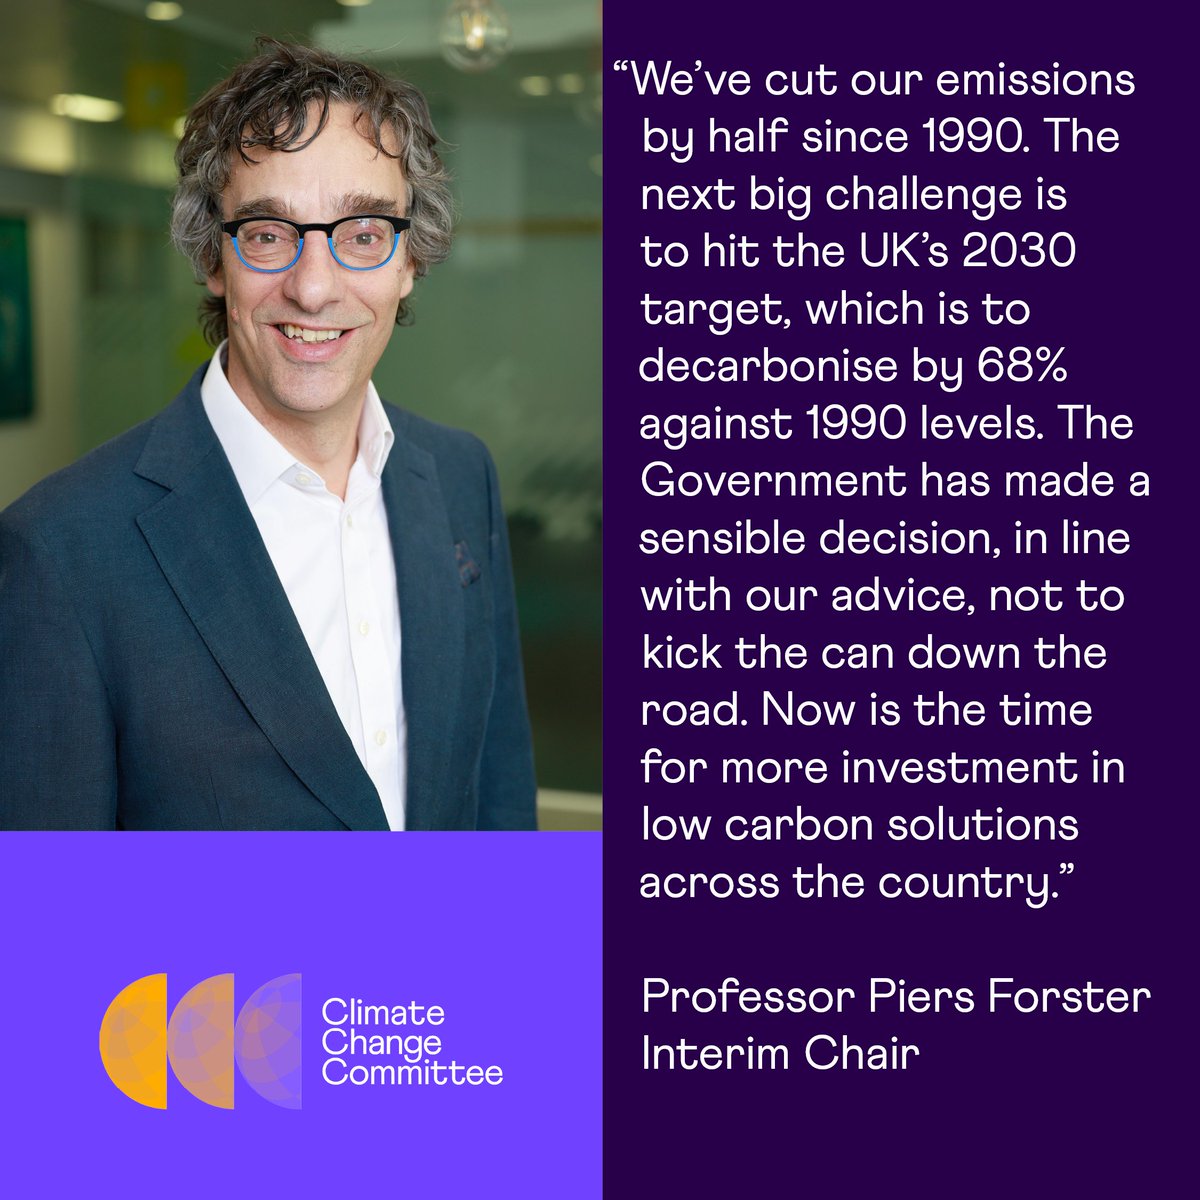 We are pleased to see the Government follow our advice and not carry forward the overachievement of the Third Carbon Budget. As ever, the aim should be to meet and outperform carbon budgets through actions to reduce emissions.